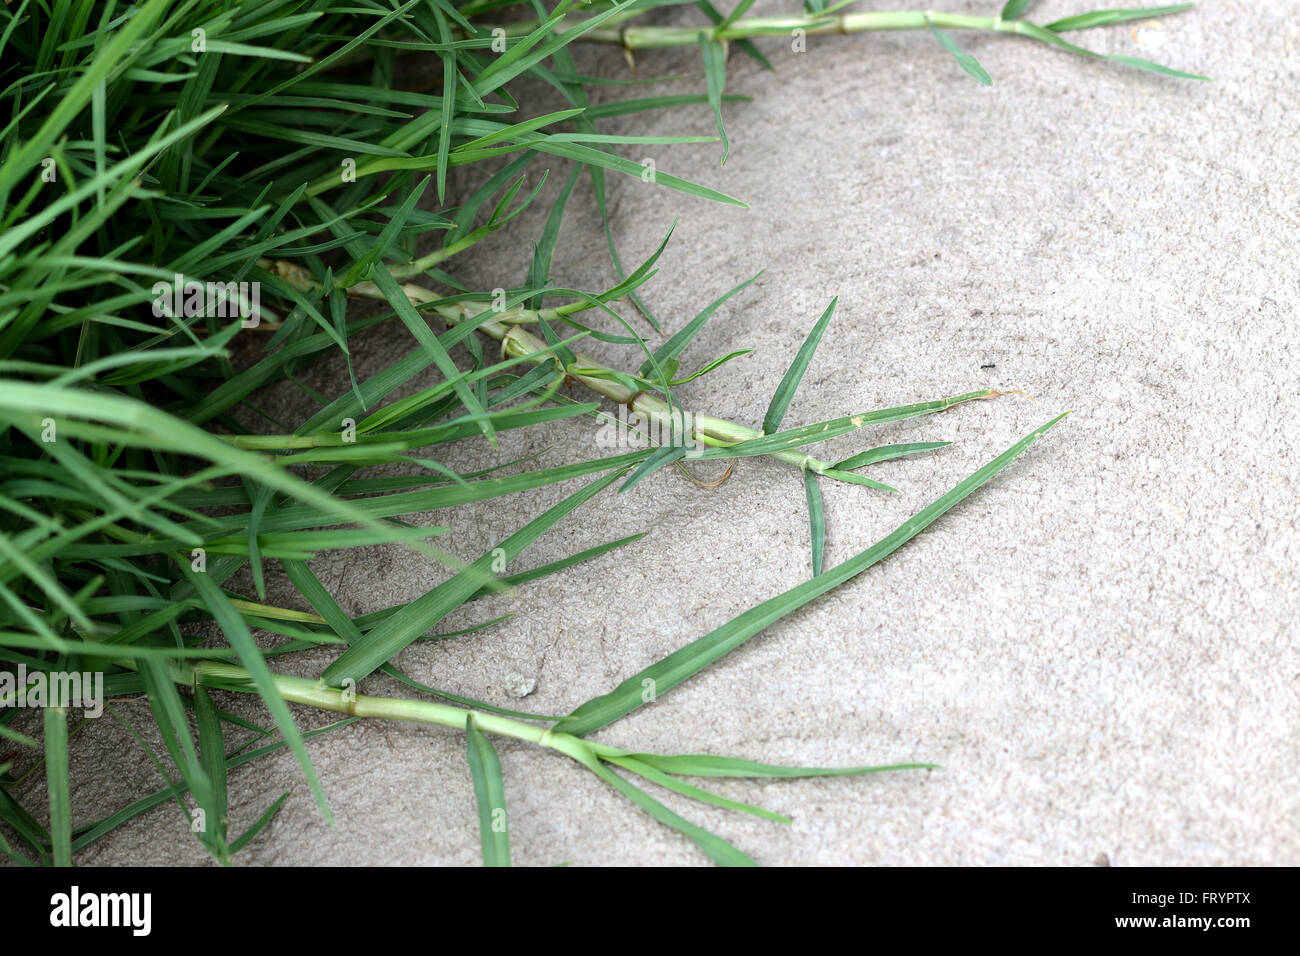 Overgrown Couch Grass growing over the concrete floor Stock Photo